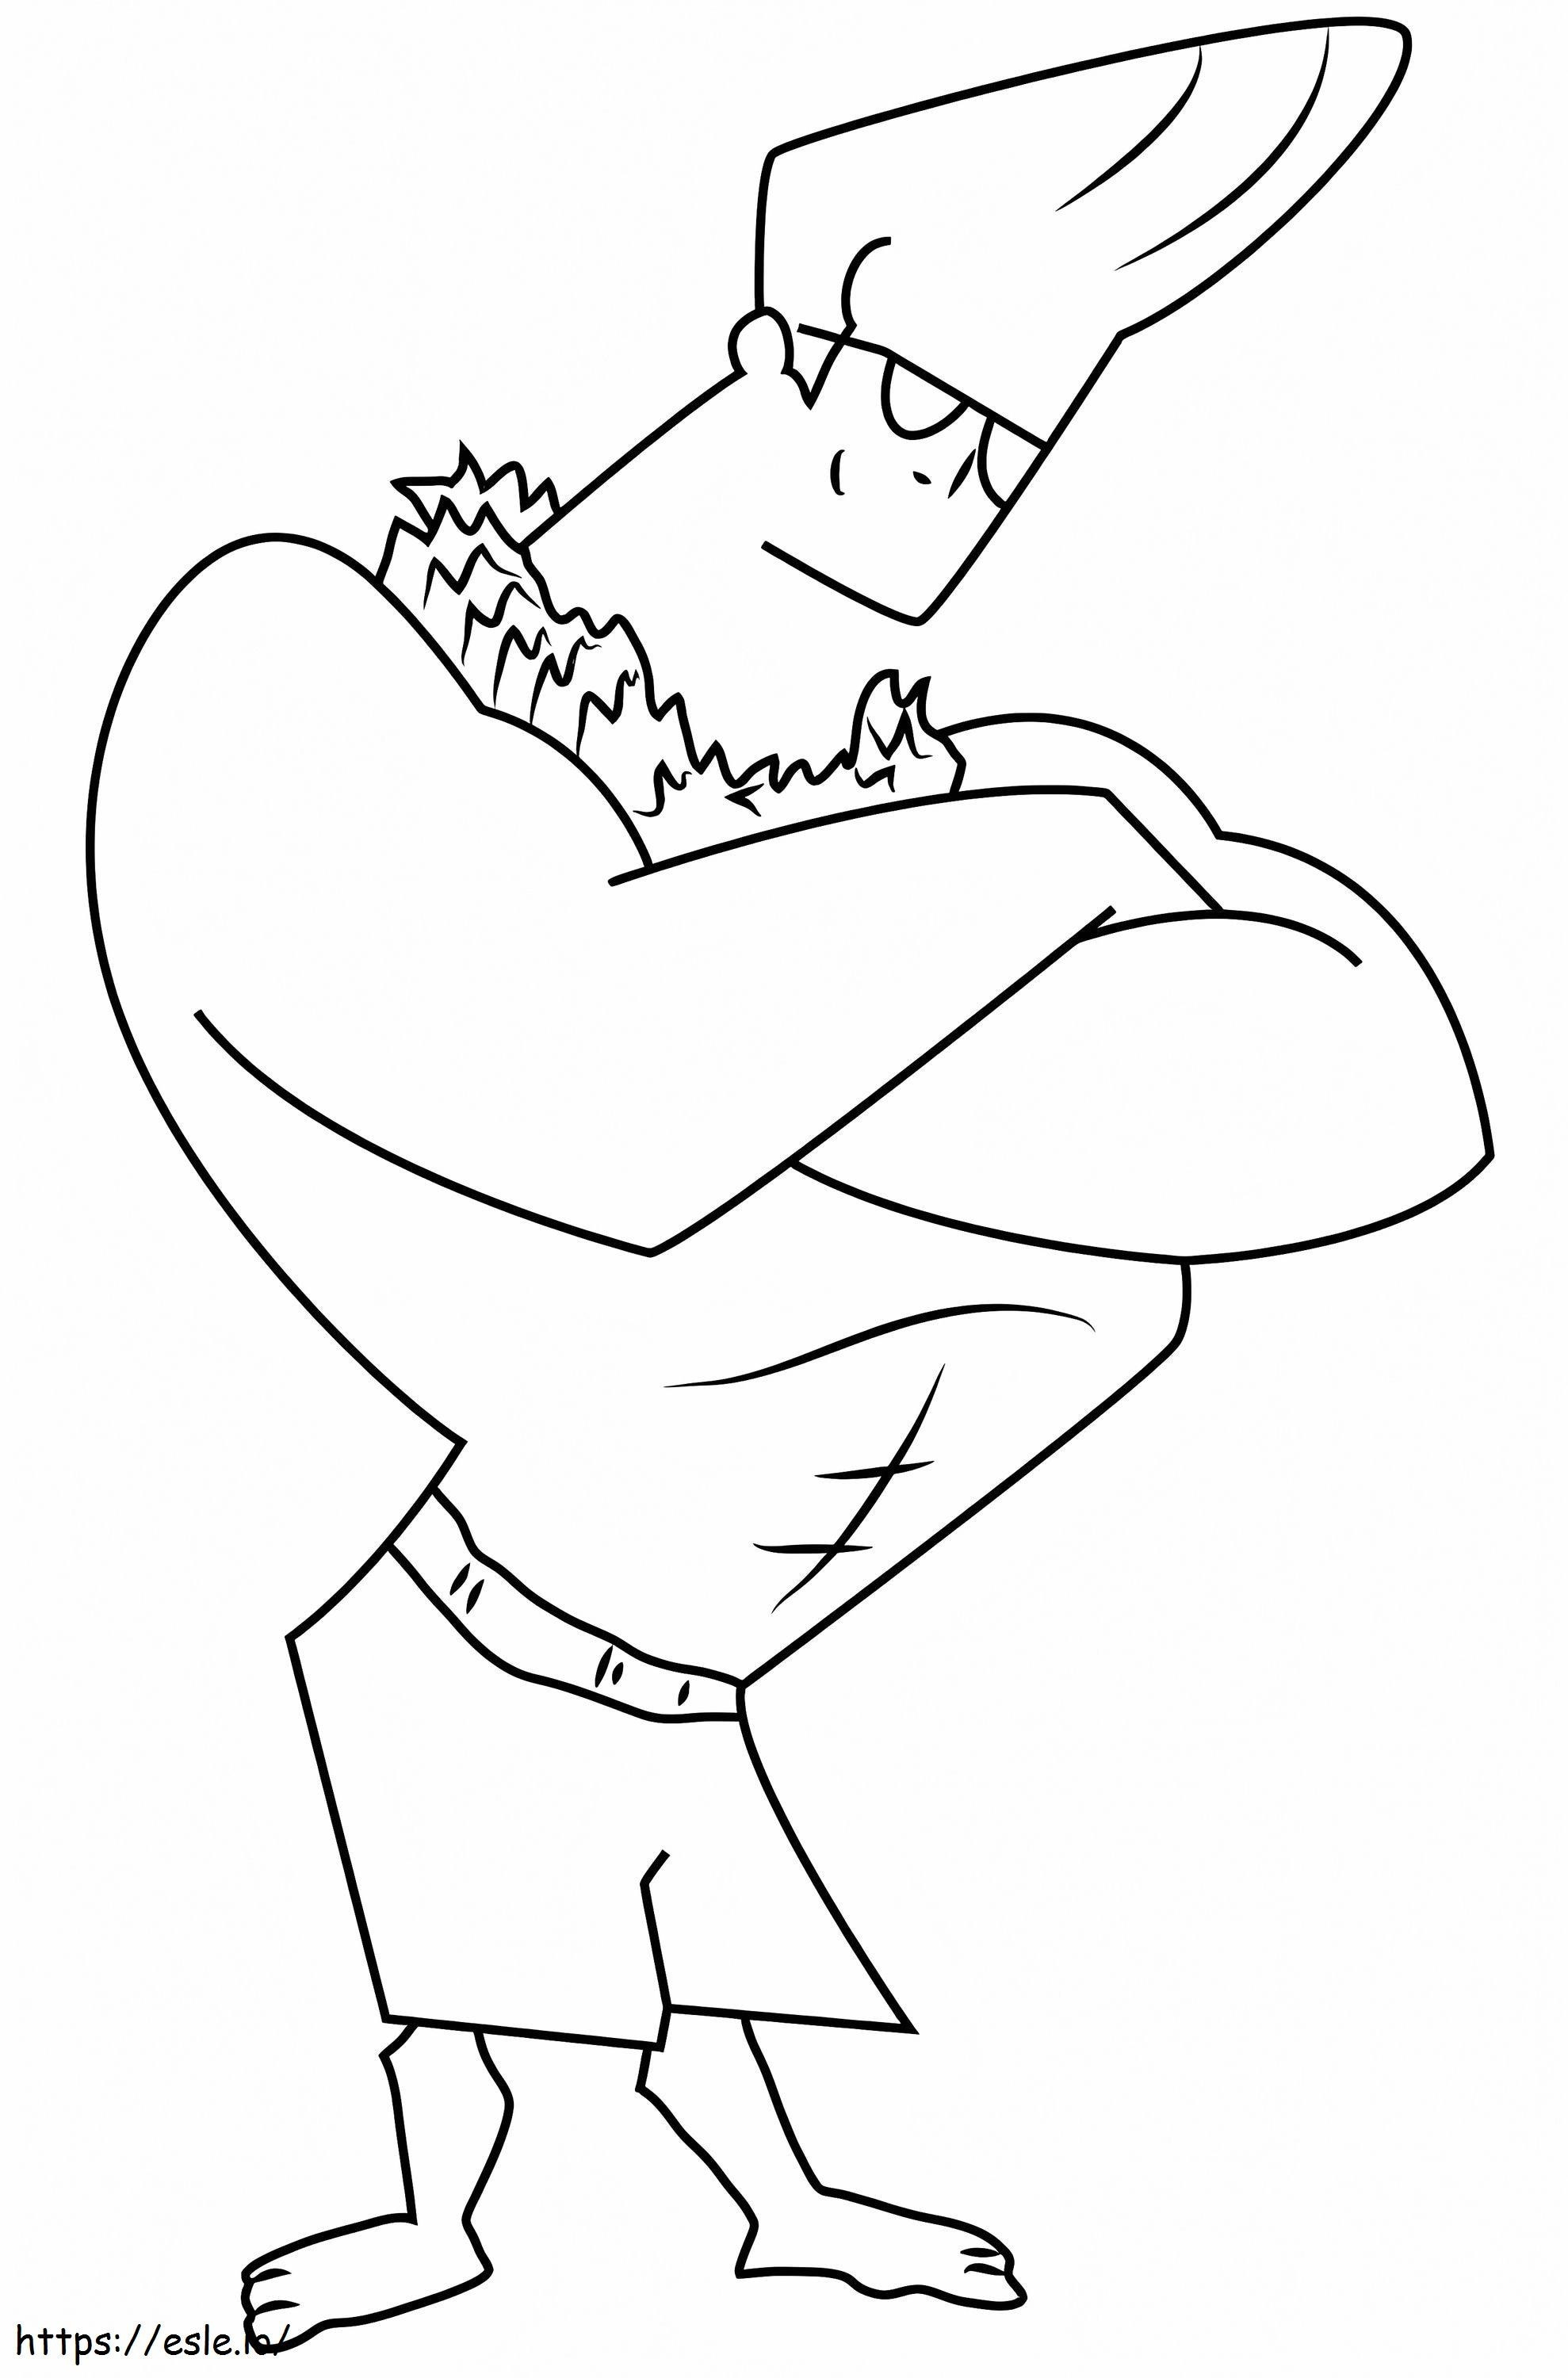 Johnny Bravo On Vacation coloring page